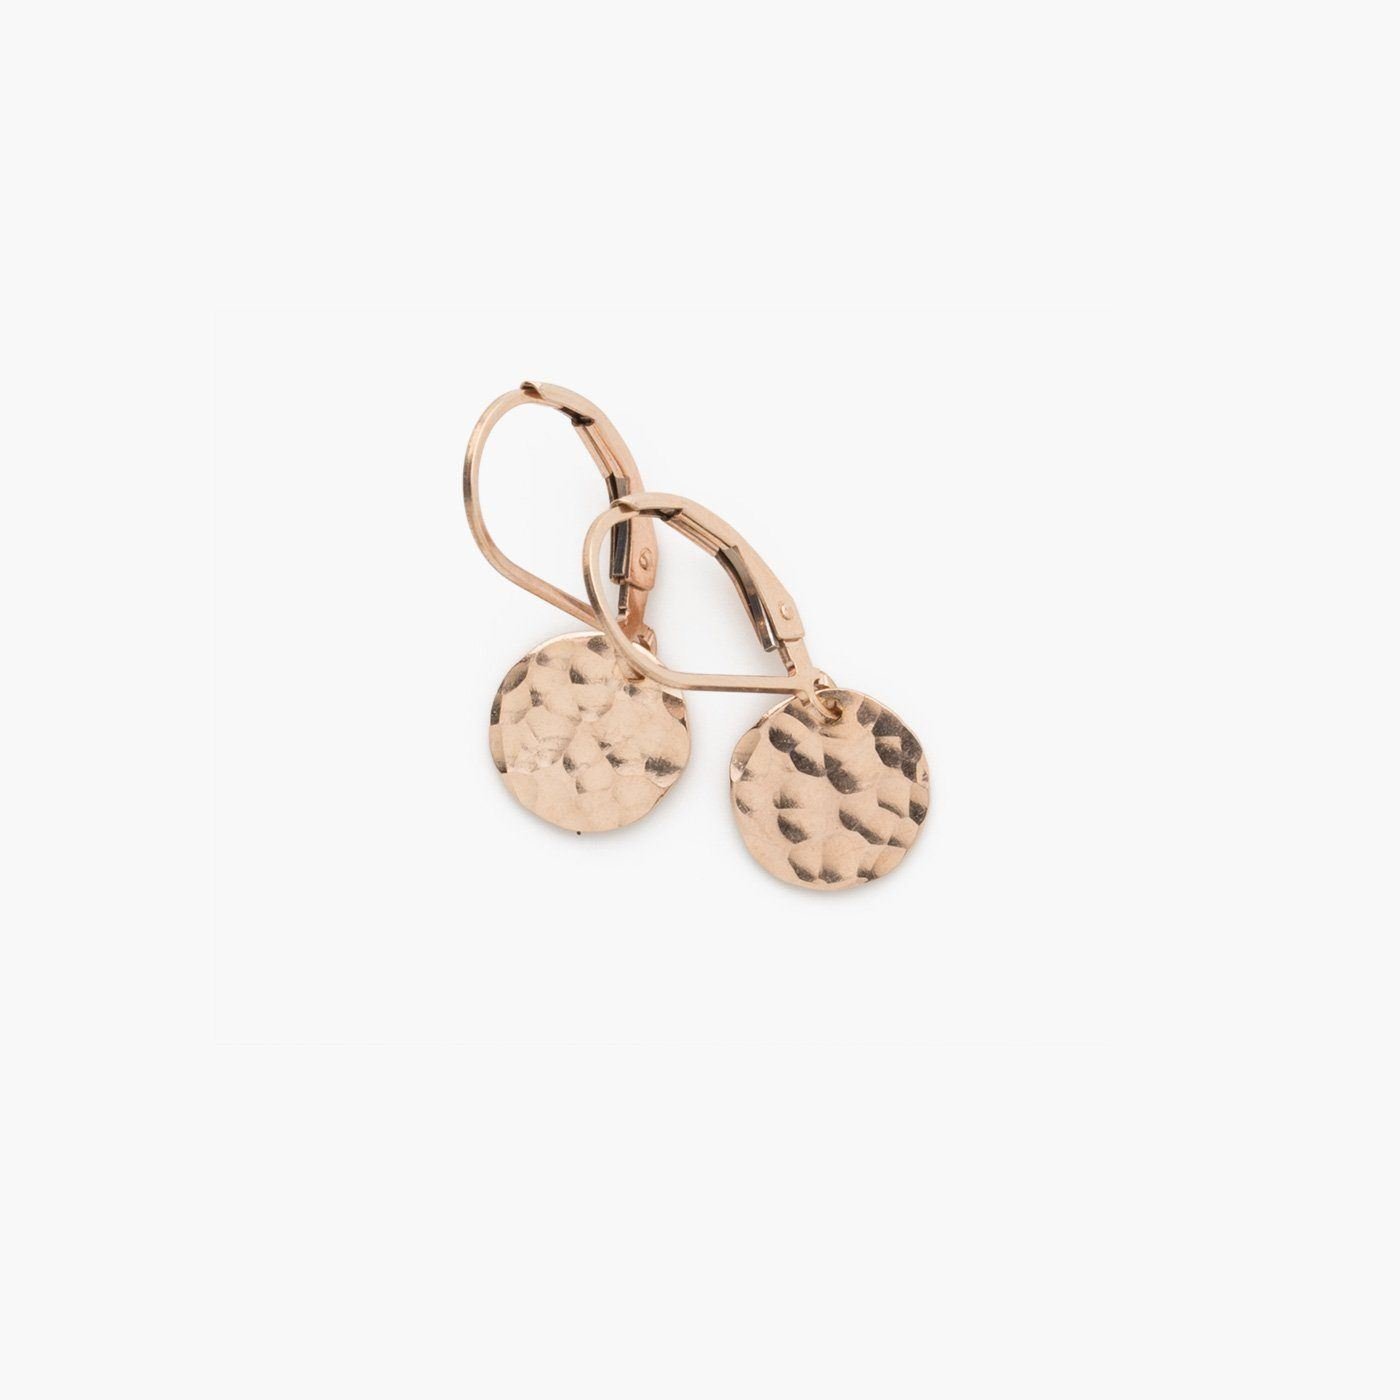 Tiny Disk Lever-back Earrings - Handmade Jewelry by Burnish